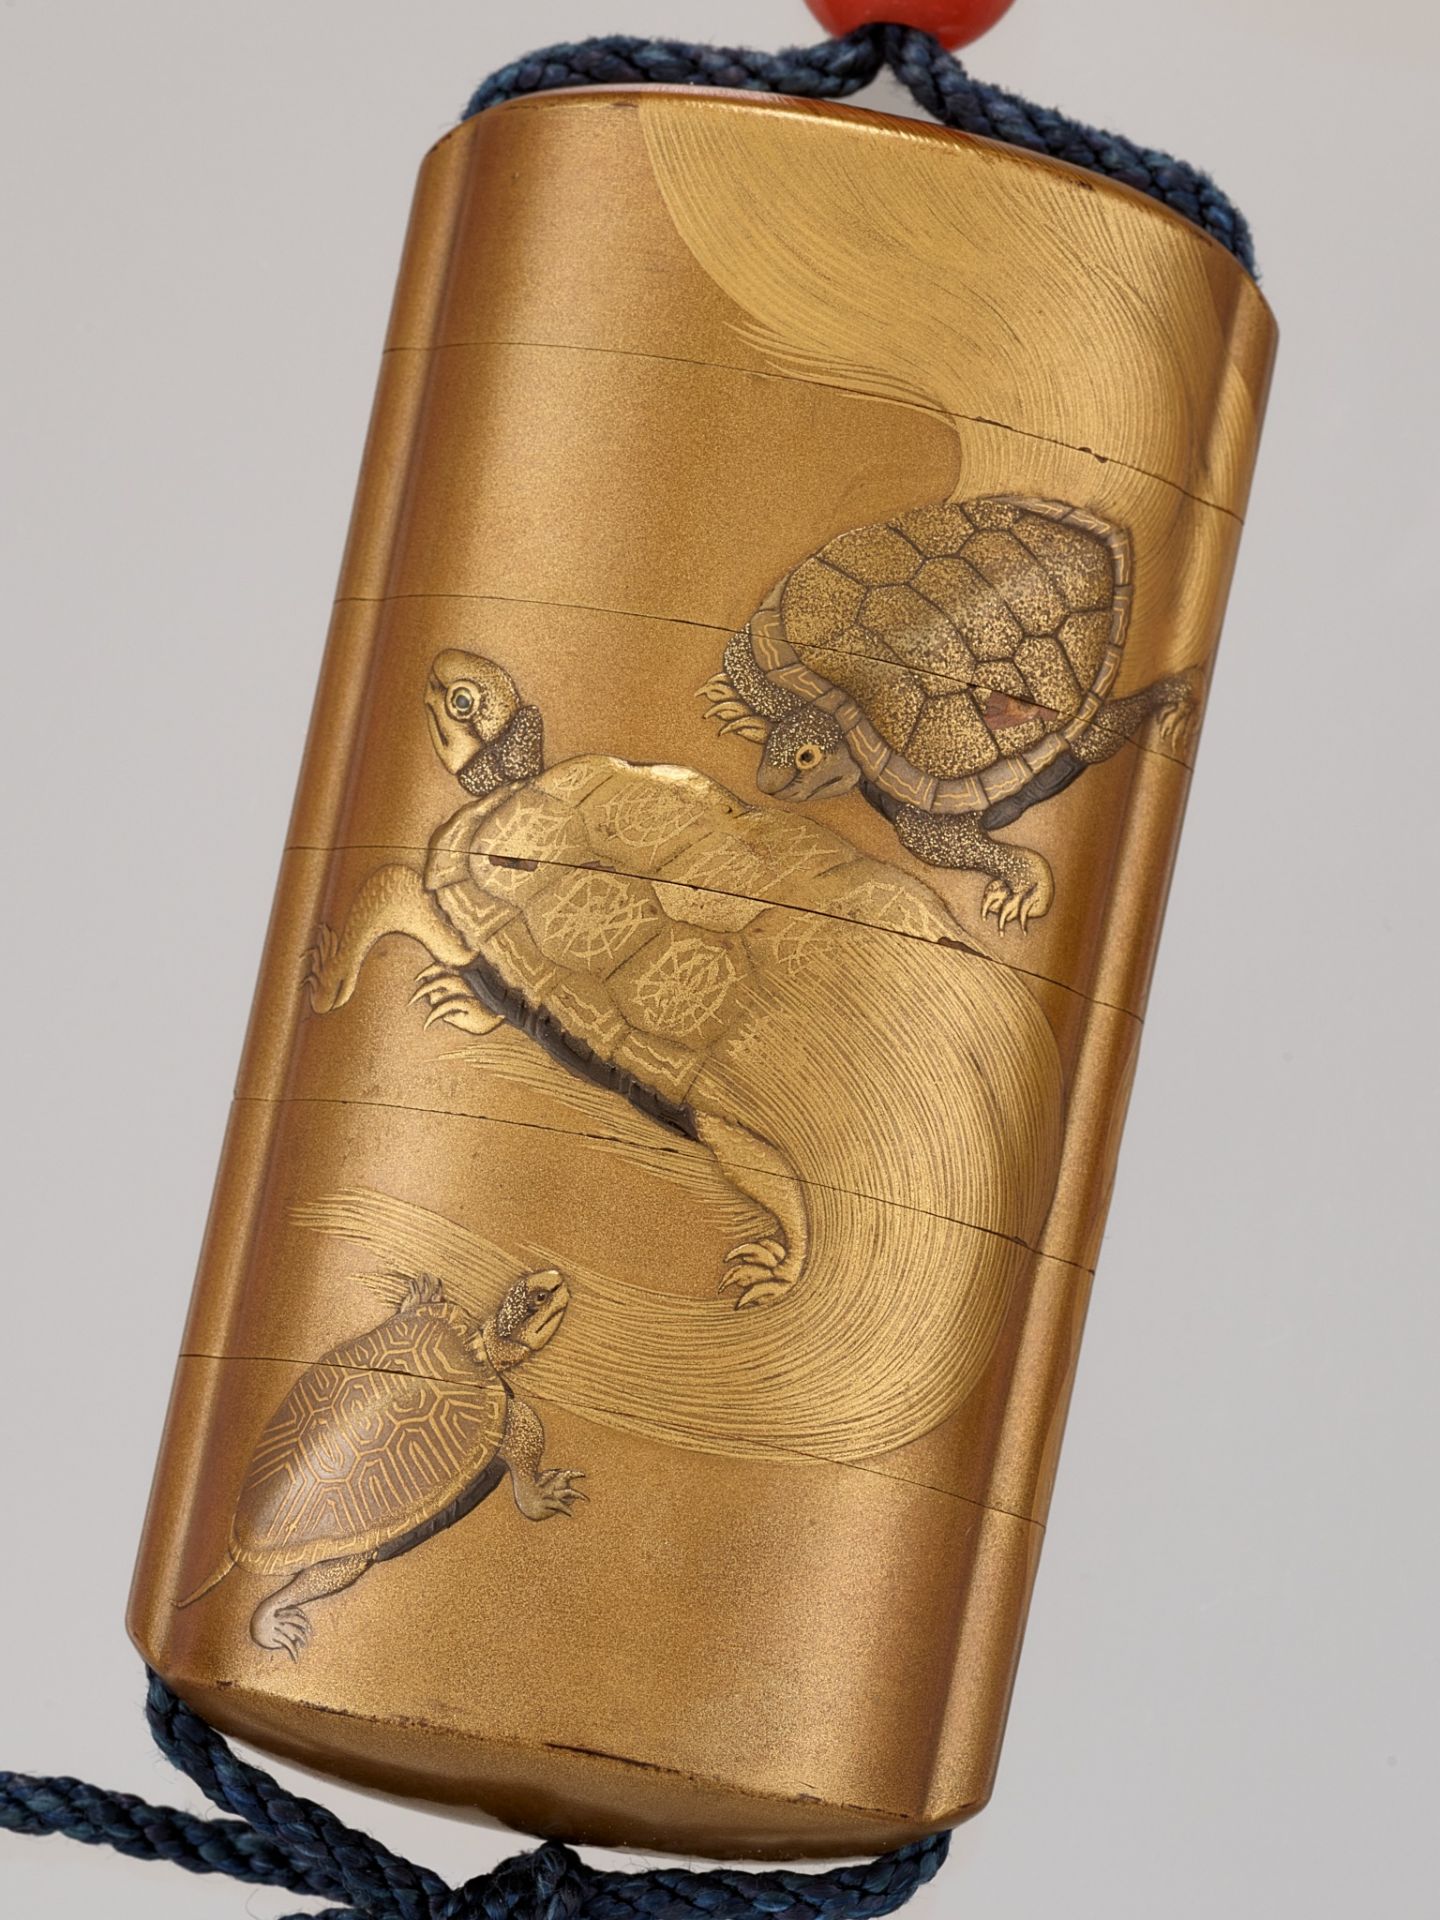 KAJIKAWA: A SUPERB FIVE-CASE GOLD LACQUER INRO WITH MINOGAME DESIGN AND WITH EN SUITE NETSUKE - Bild 2 aus 8